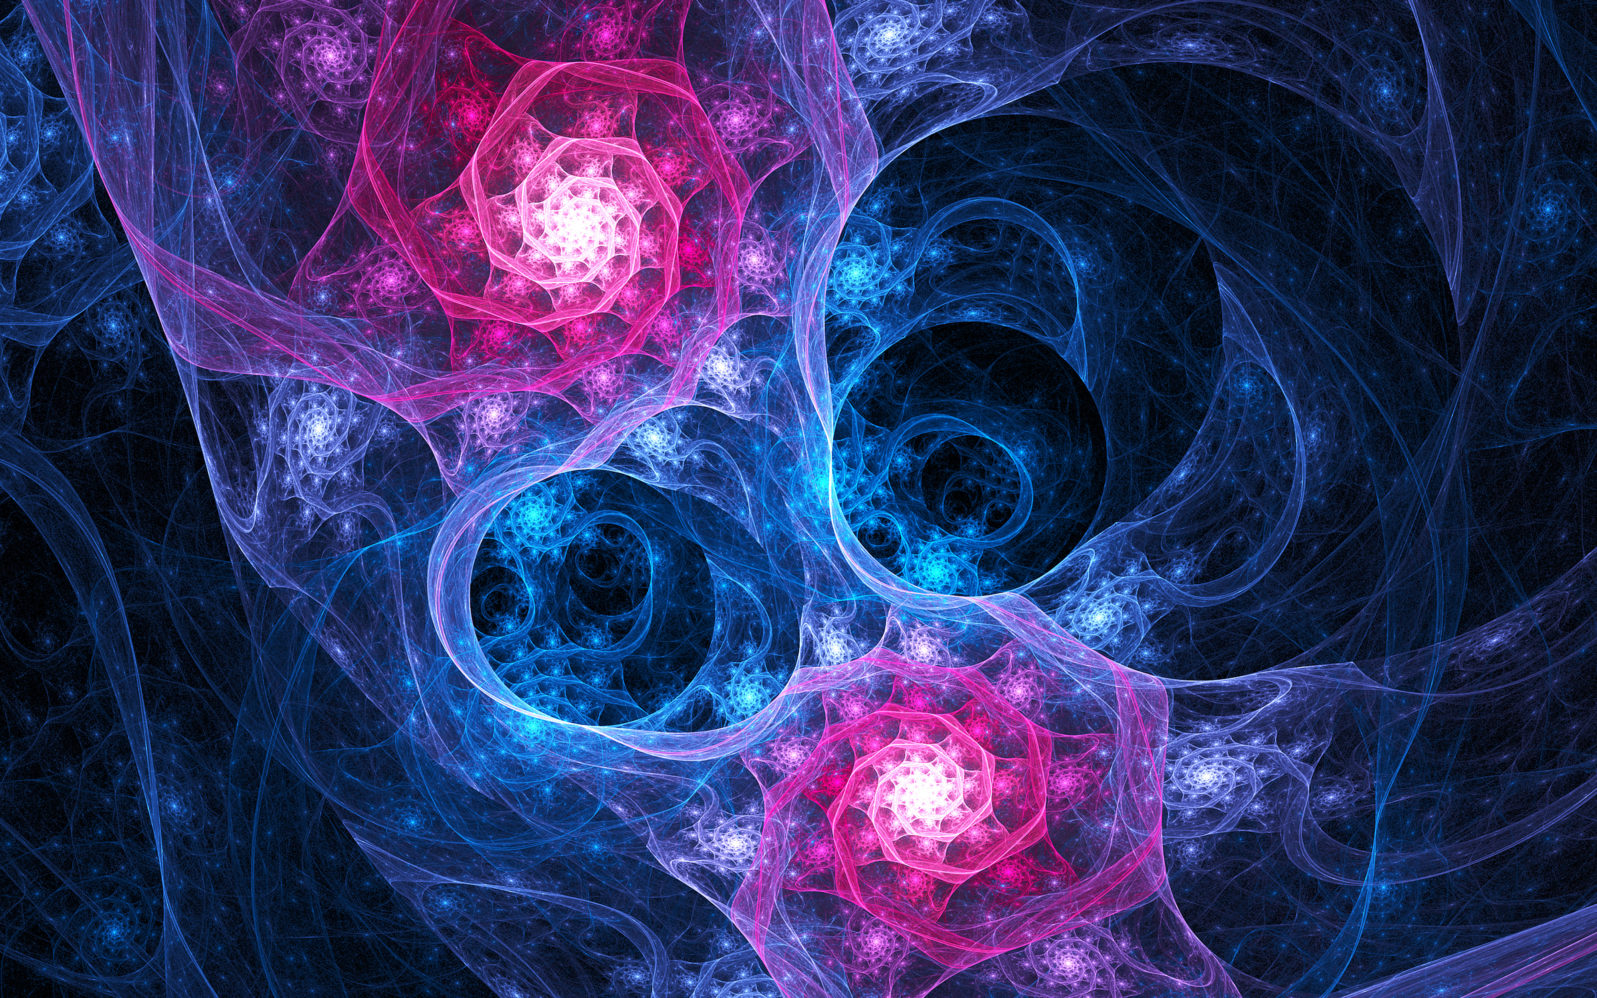 Abstract fractal patterns and shapes. Beautiful abstract background. Сolored waves,spirals, lines and circles. Infinite universe.